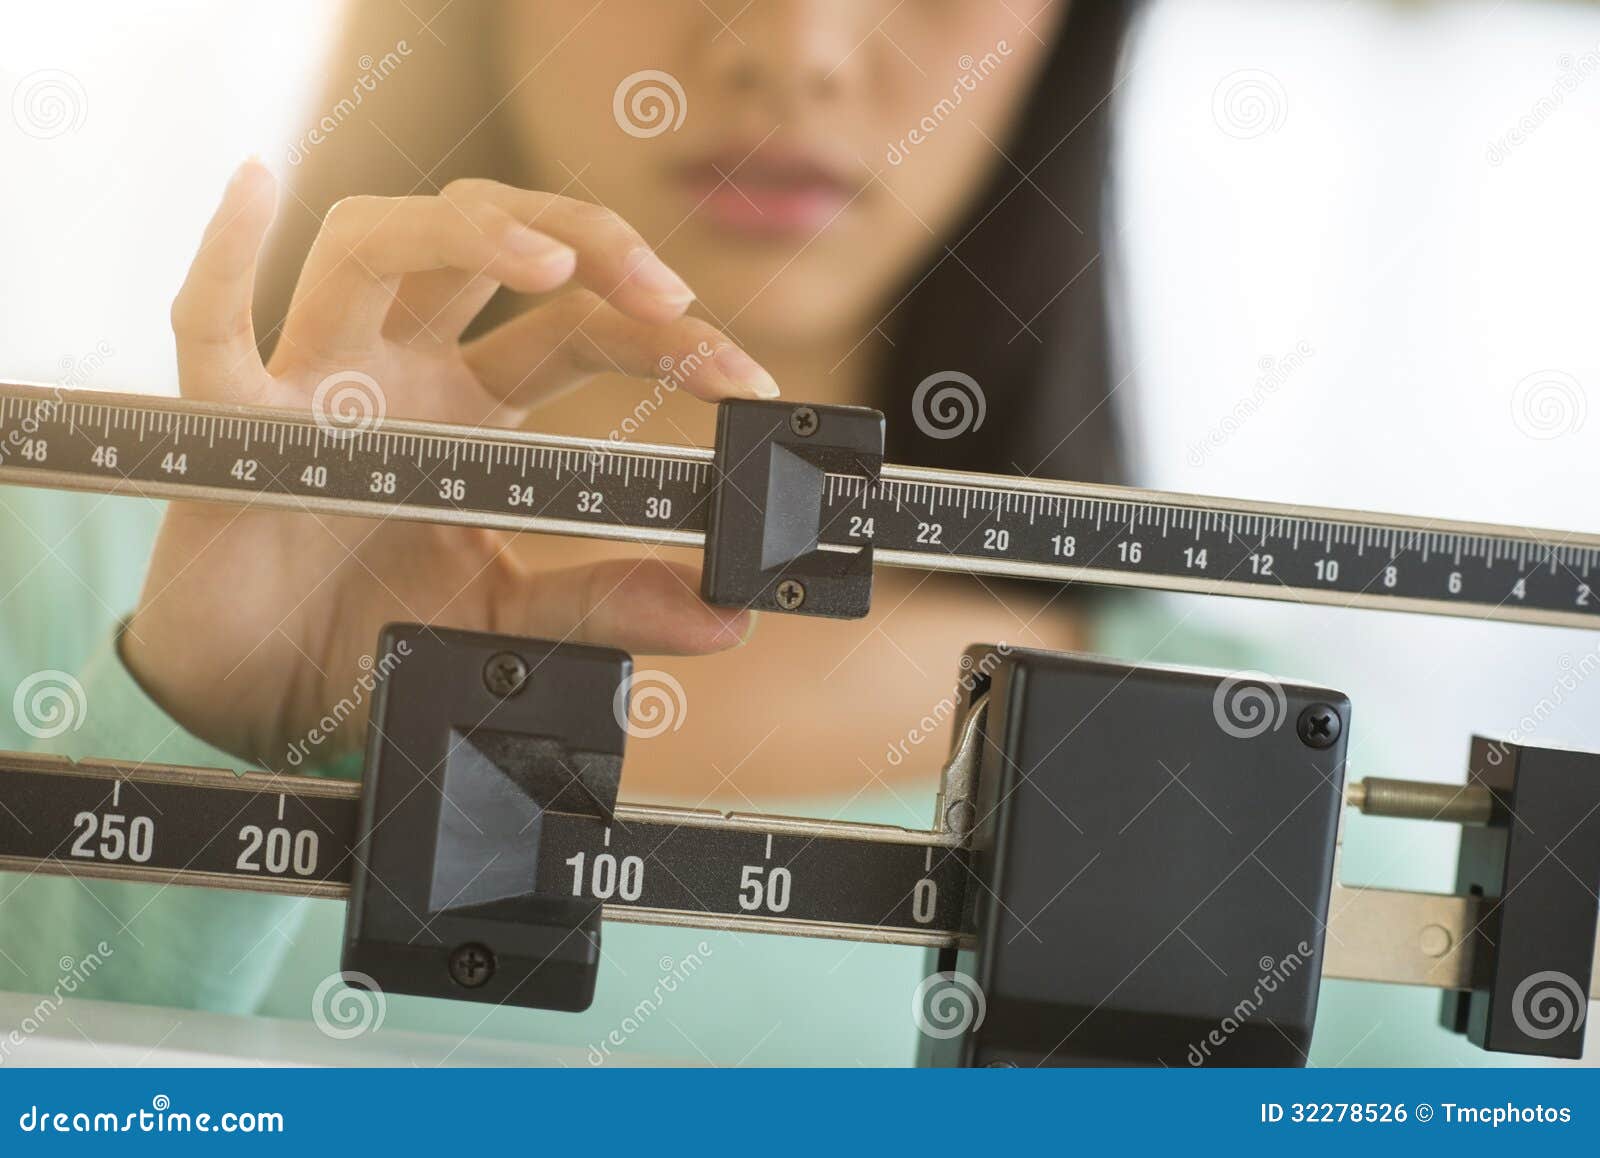 midsection of woman adjusting weight scale